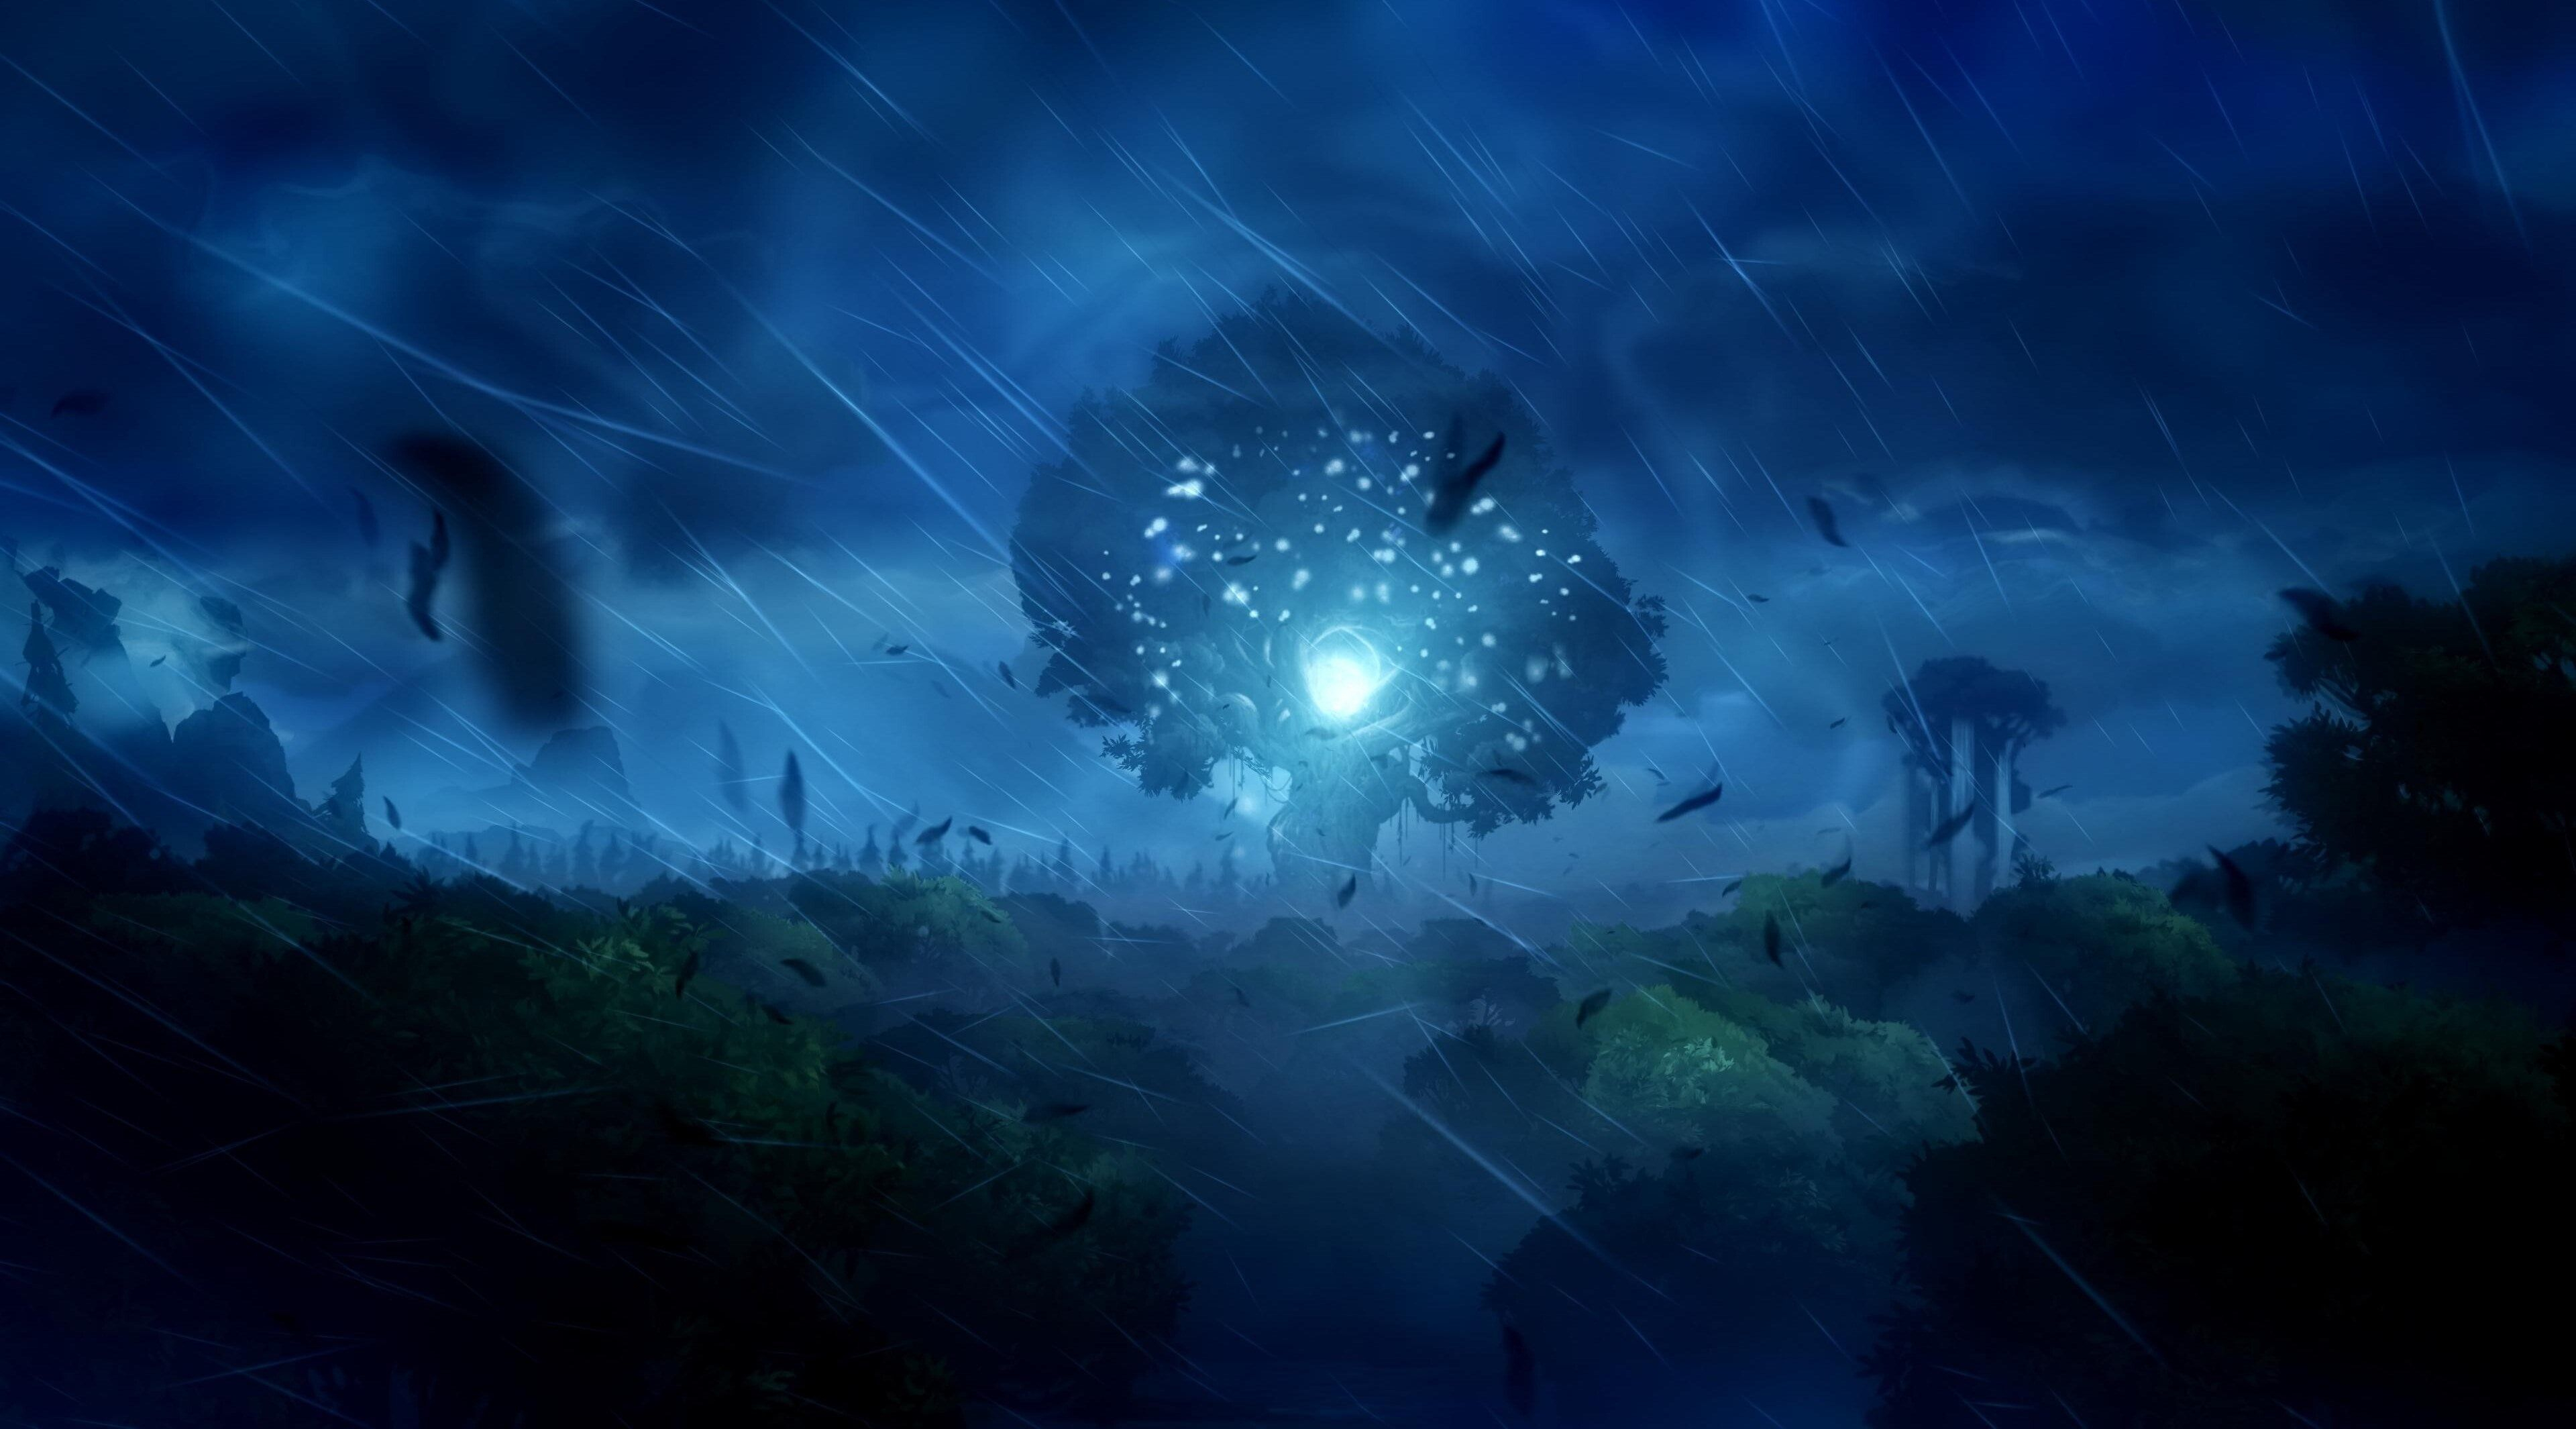 3840x2130 ori and the blind forest 4k best for desktop #4K #wallpaper #hdwallpaper #desktop | Forest wallpaper, Animated wallpapers for mobile, Hd wallpaper